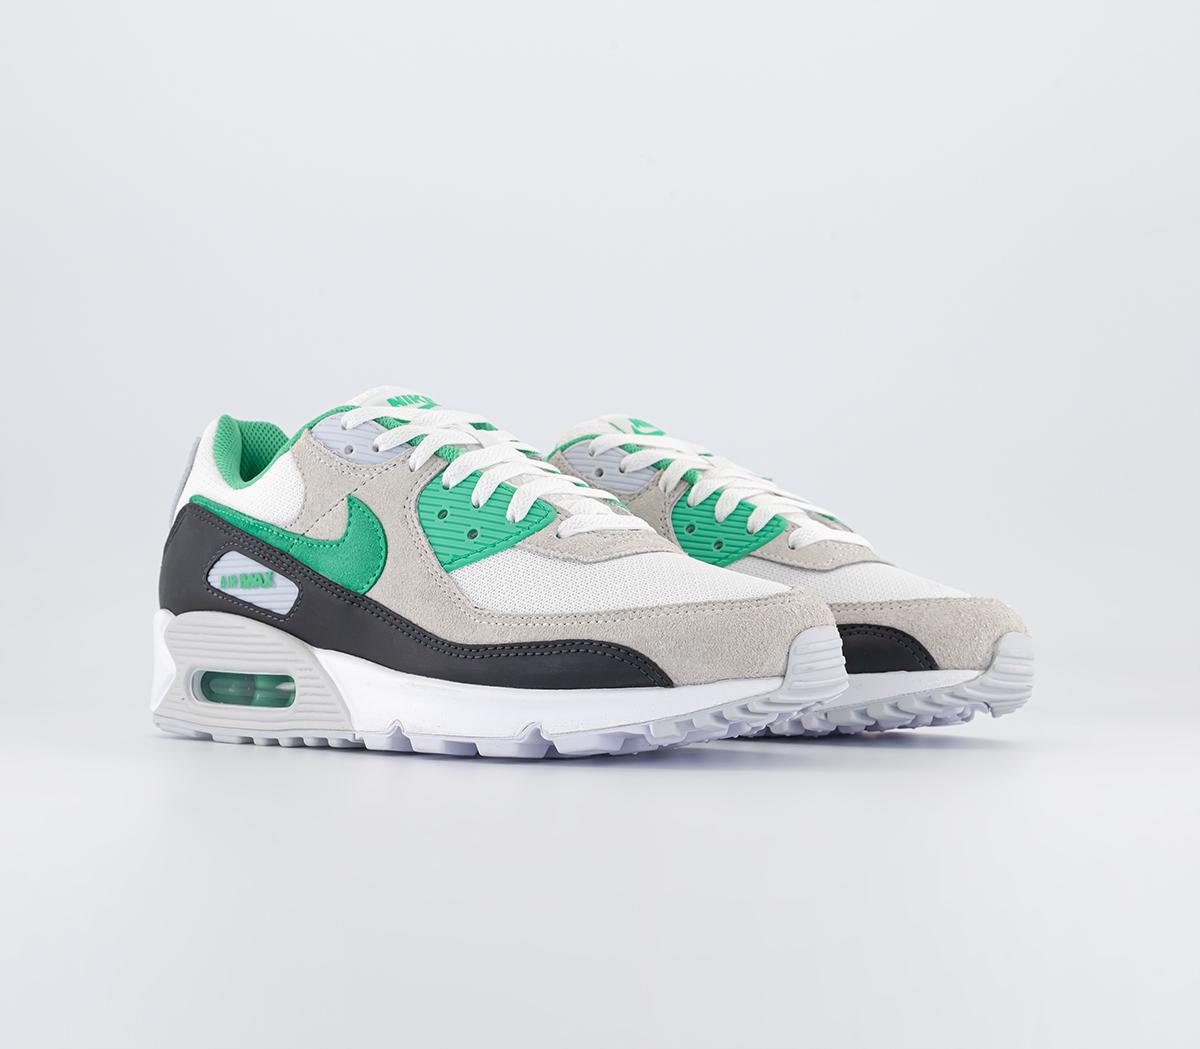 Nike Air Max 90 Trainers White Spring Green Anthracite, 8.5